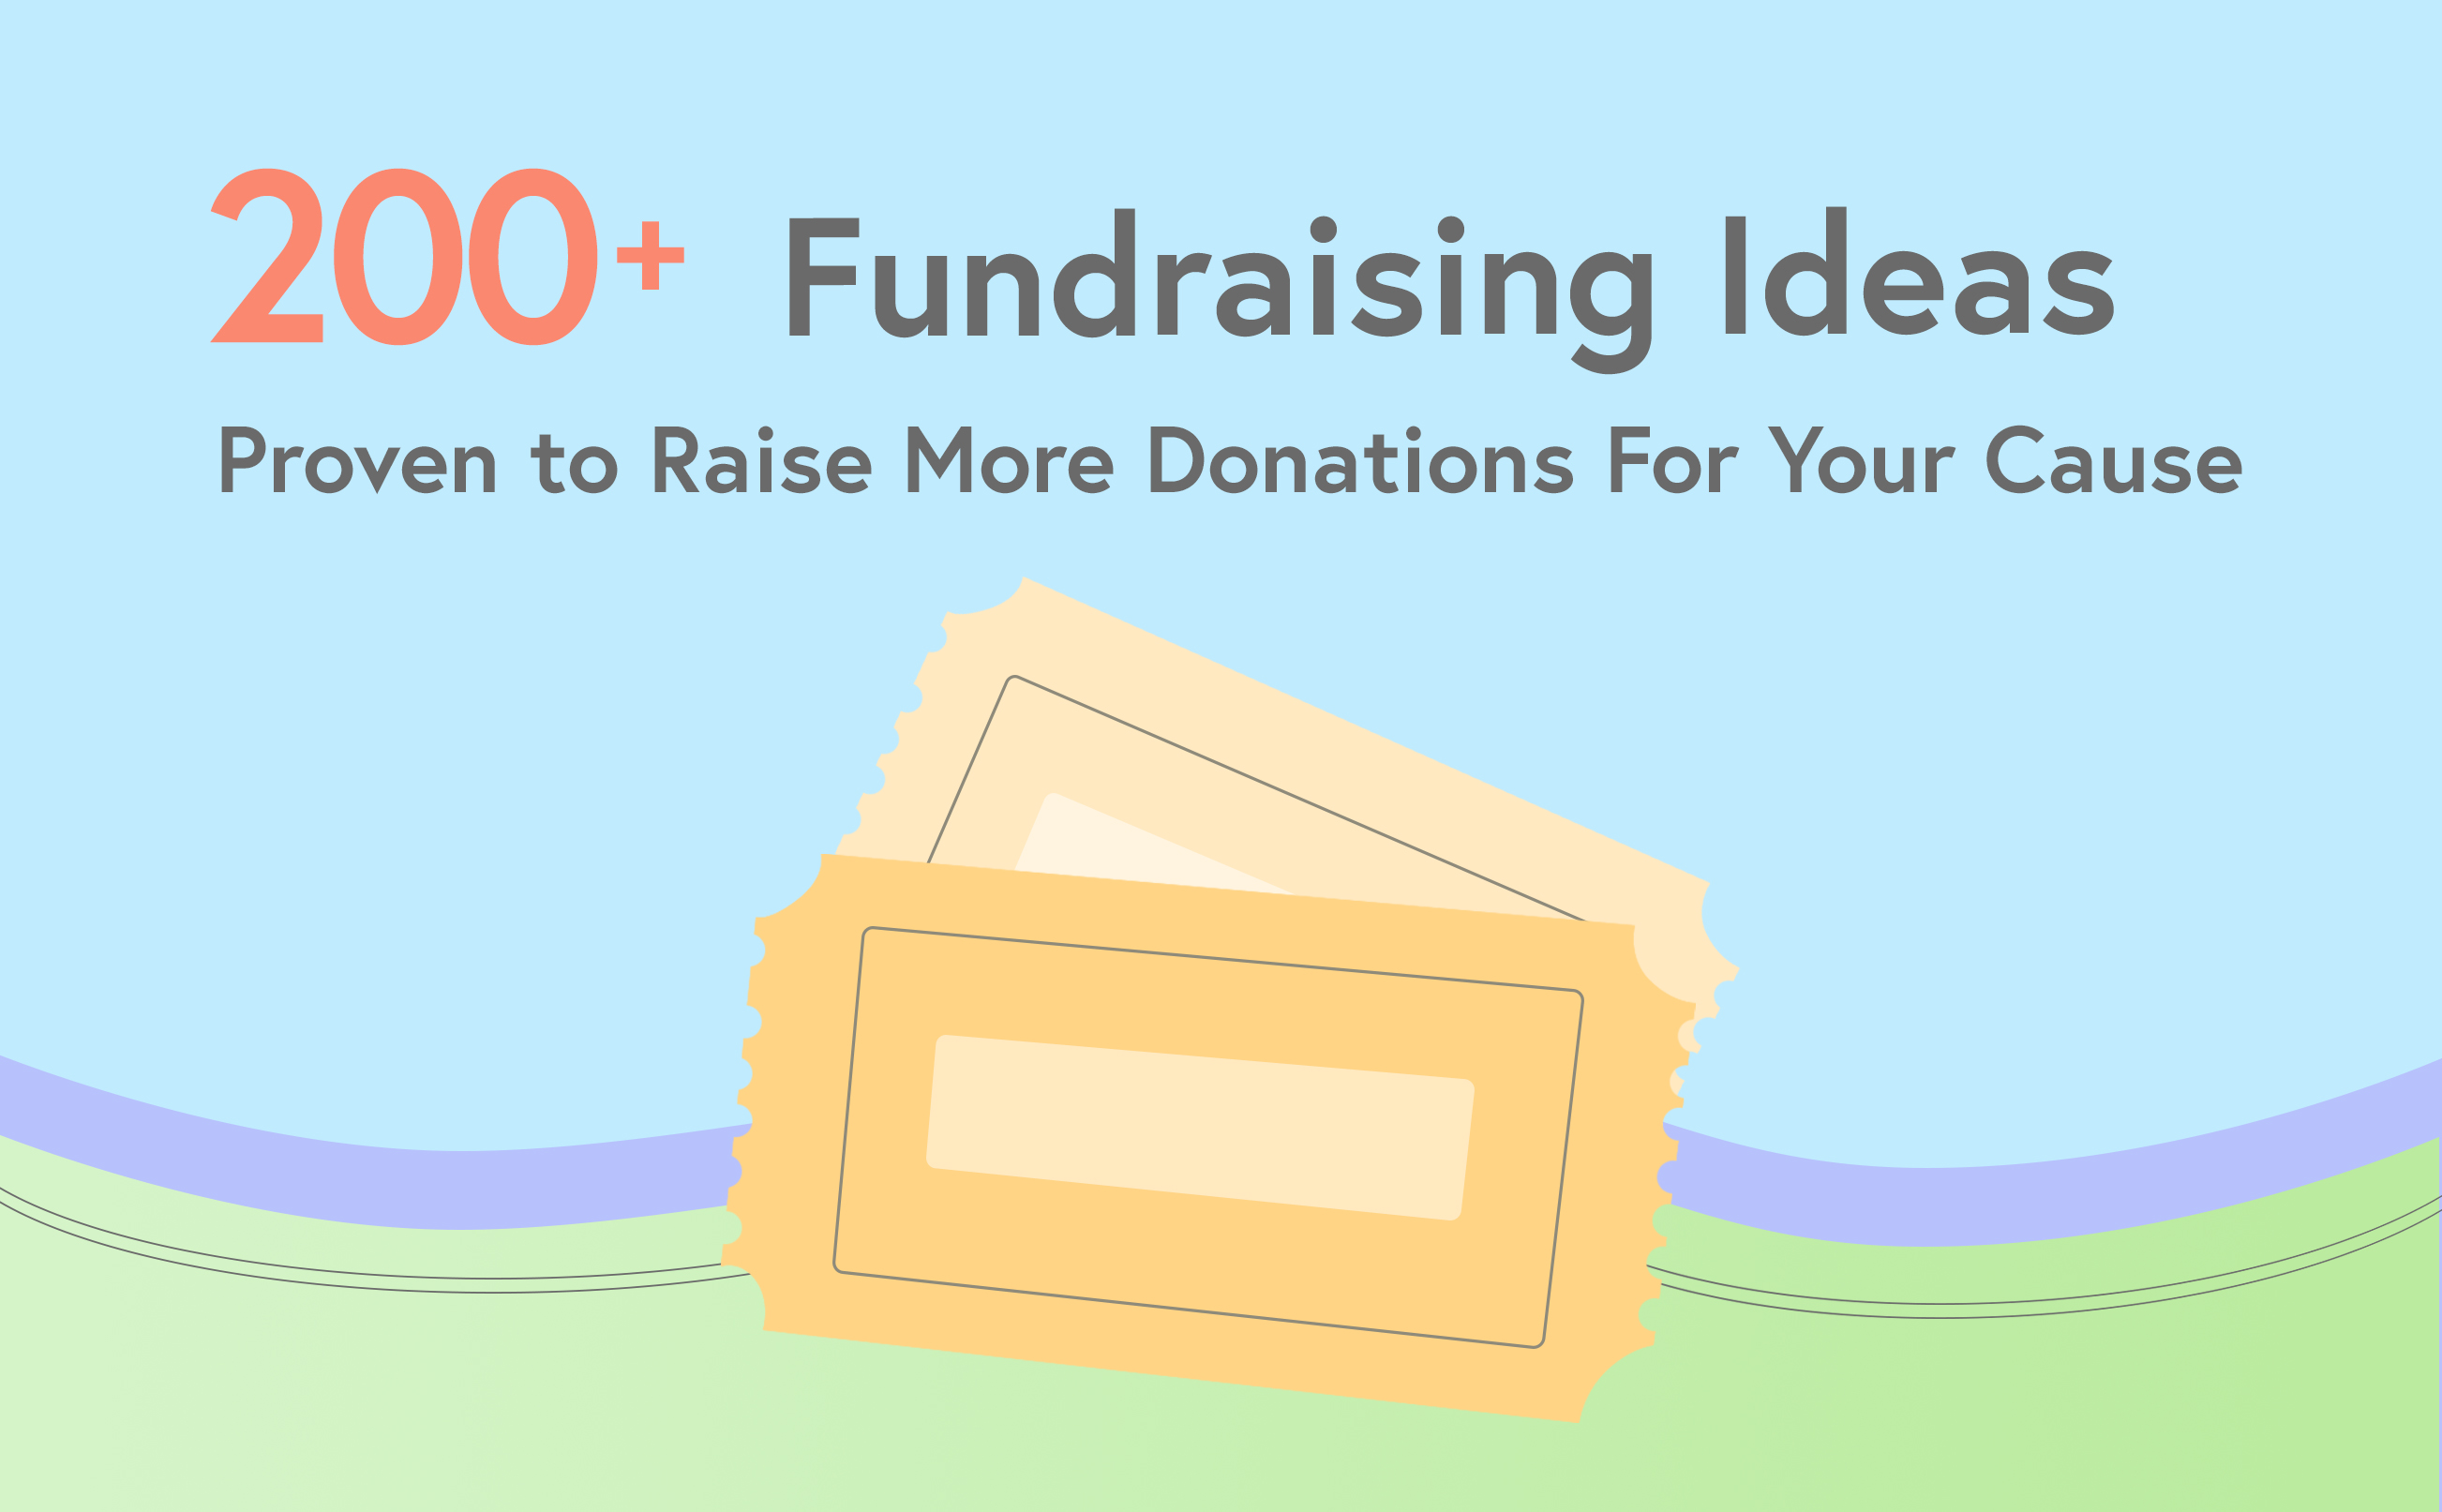 How to Pass Your School’s Fundraising Test